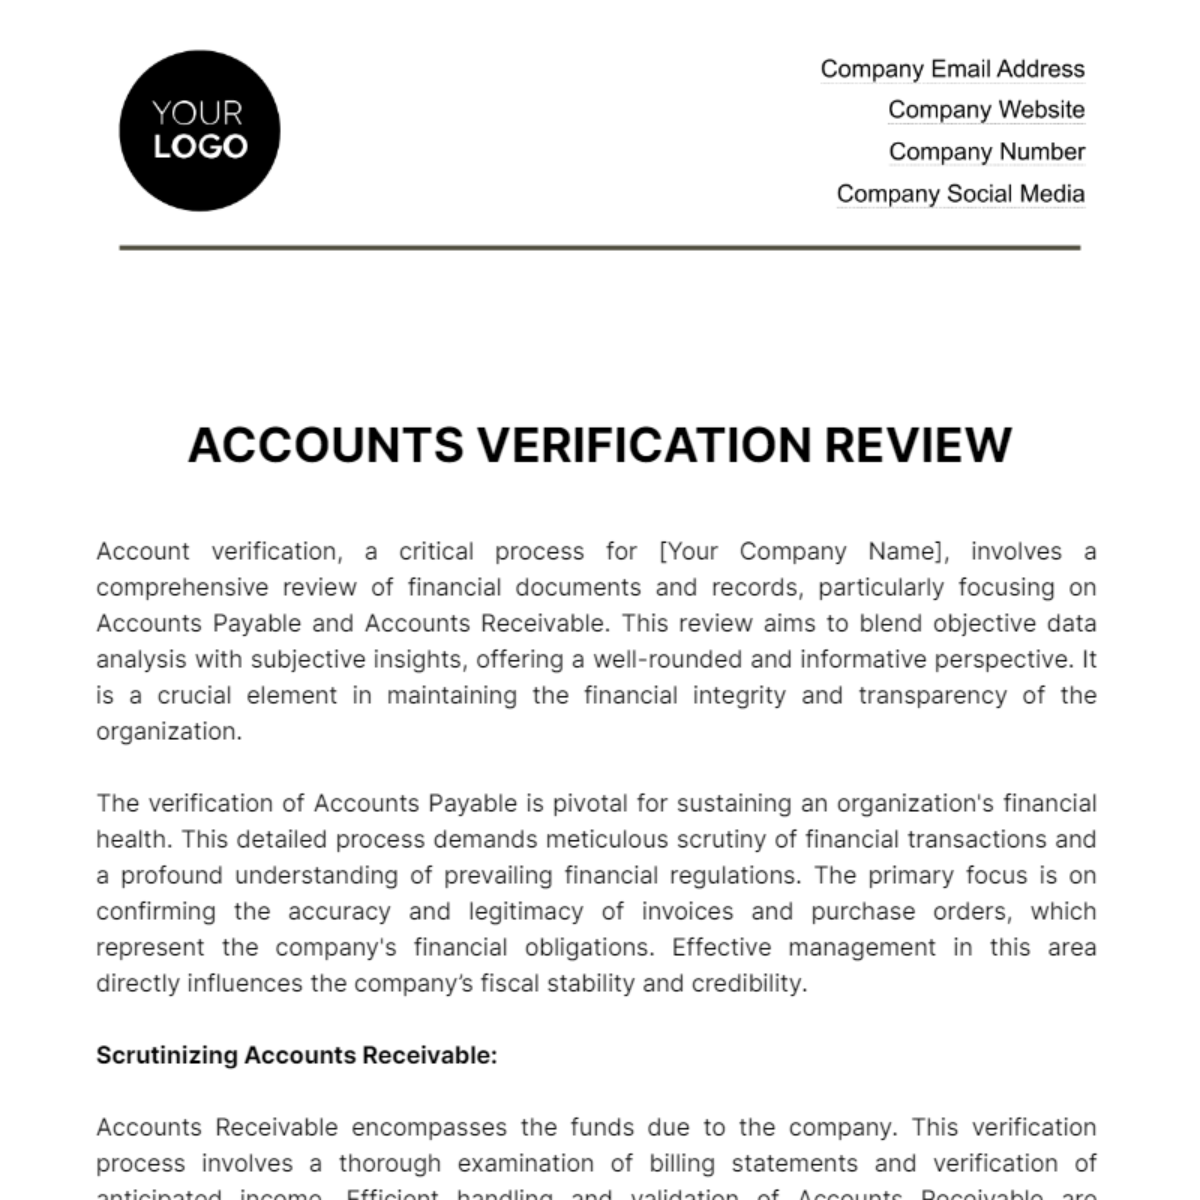 Free Accounts Verification Review Template